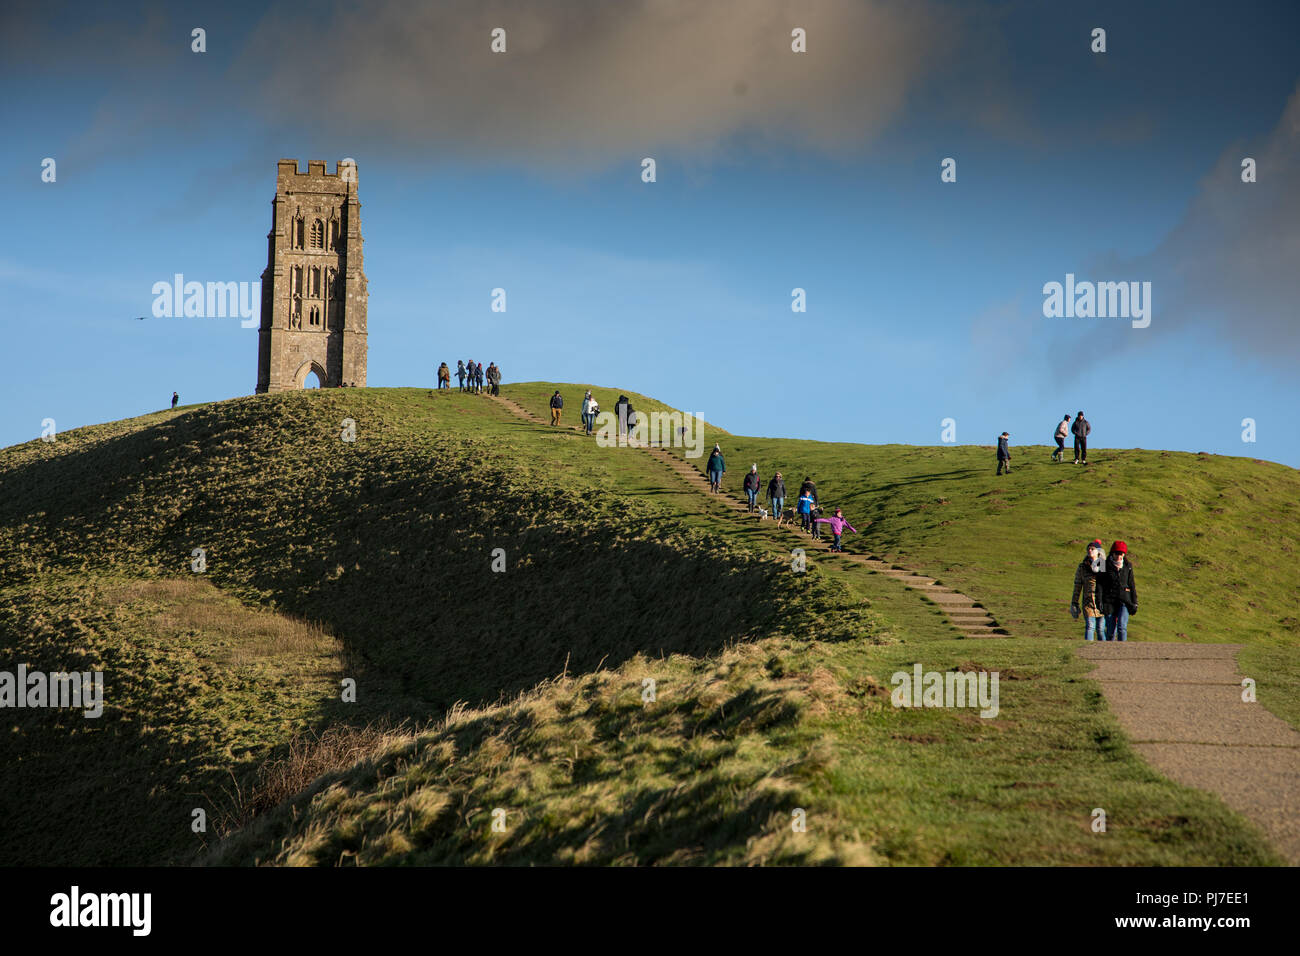 St Michael's Tower on Glastonbury Tor and town, Somerset England. Stock Photo